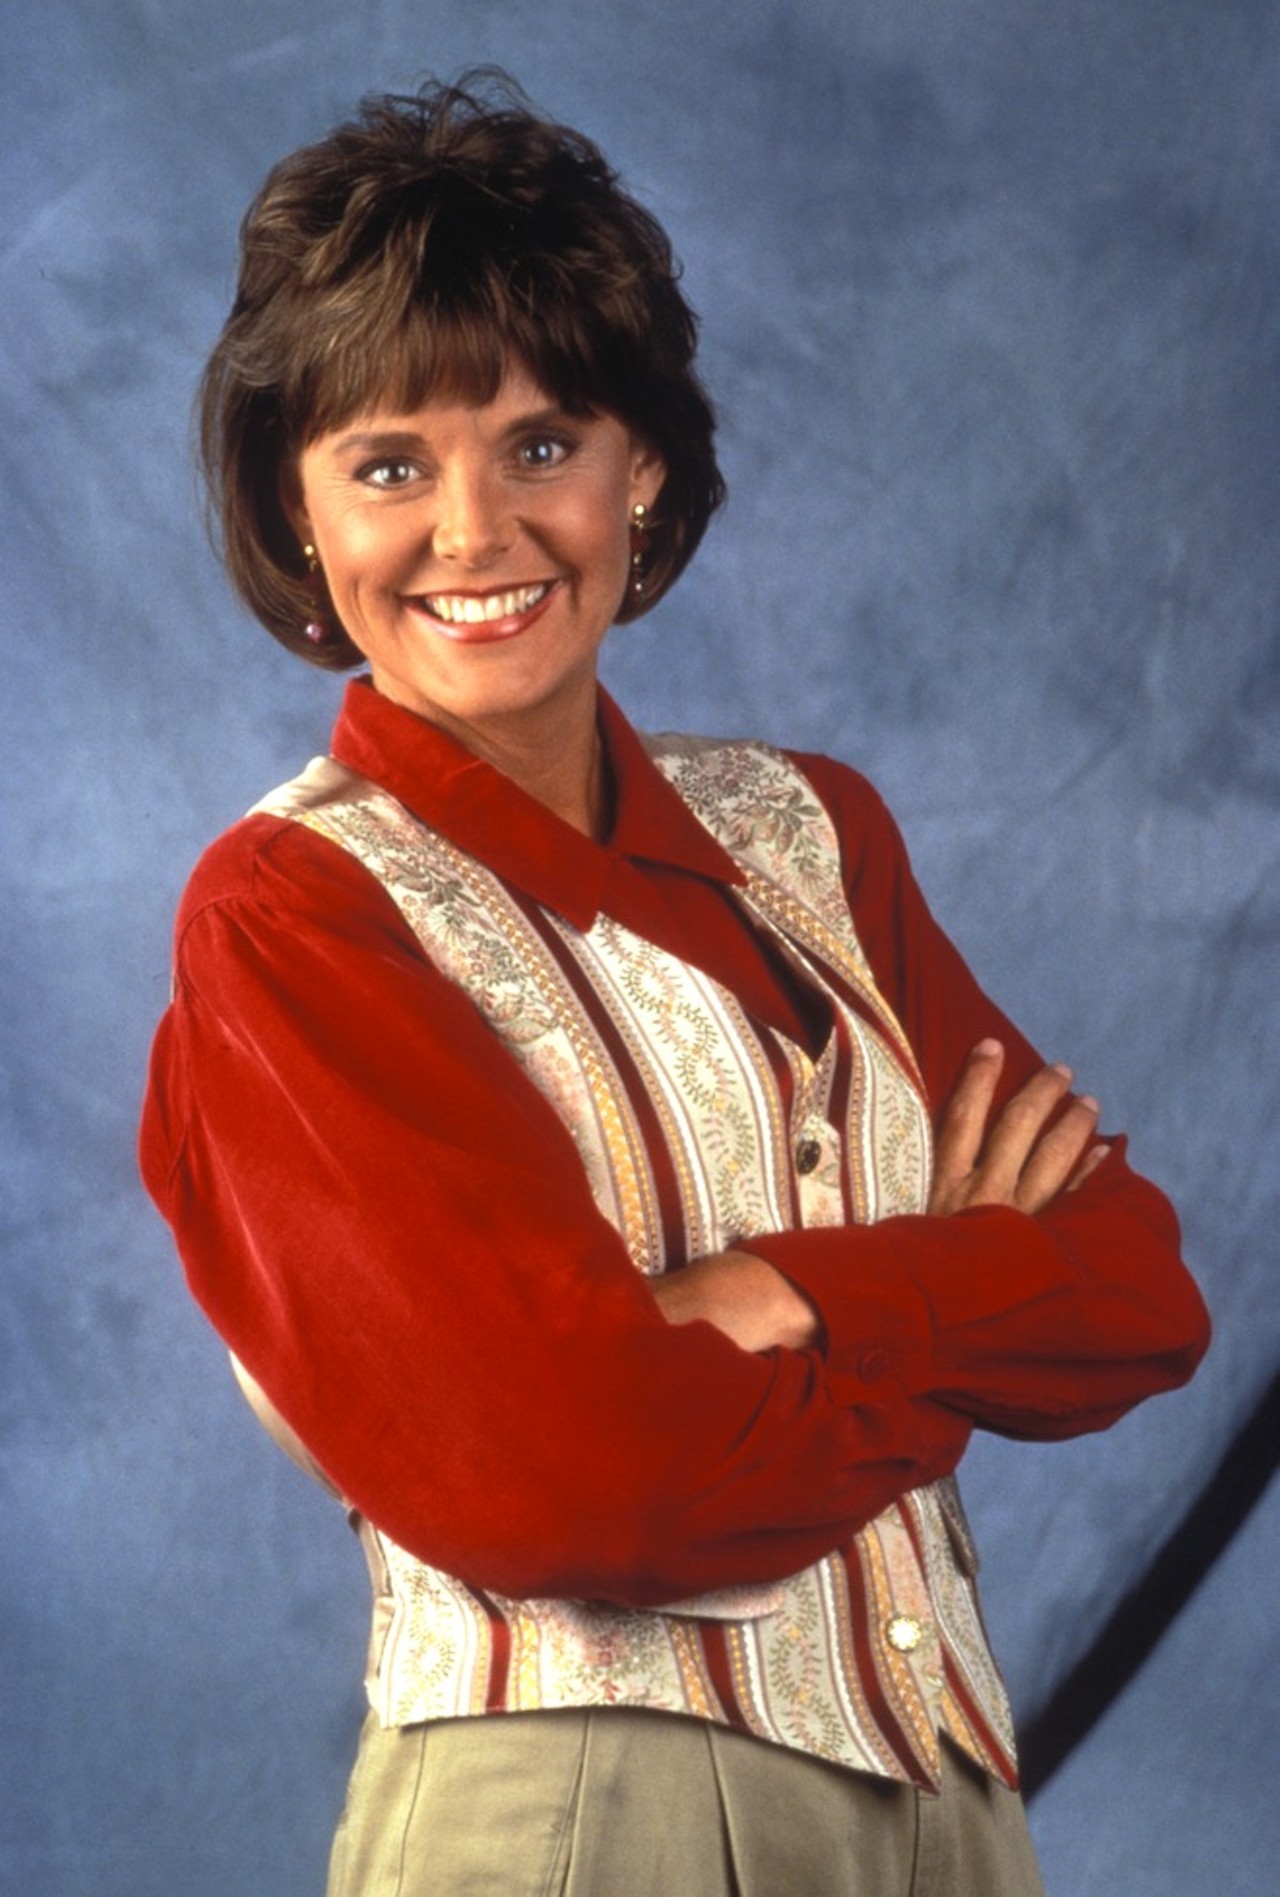 Amanda Bearse, who played Marci Darcy on Married with Children, attended Rollins College. Before that, she was a graduate of Winter Park High School. Nowadays, she works as a director for the Disney Channel.via